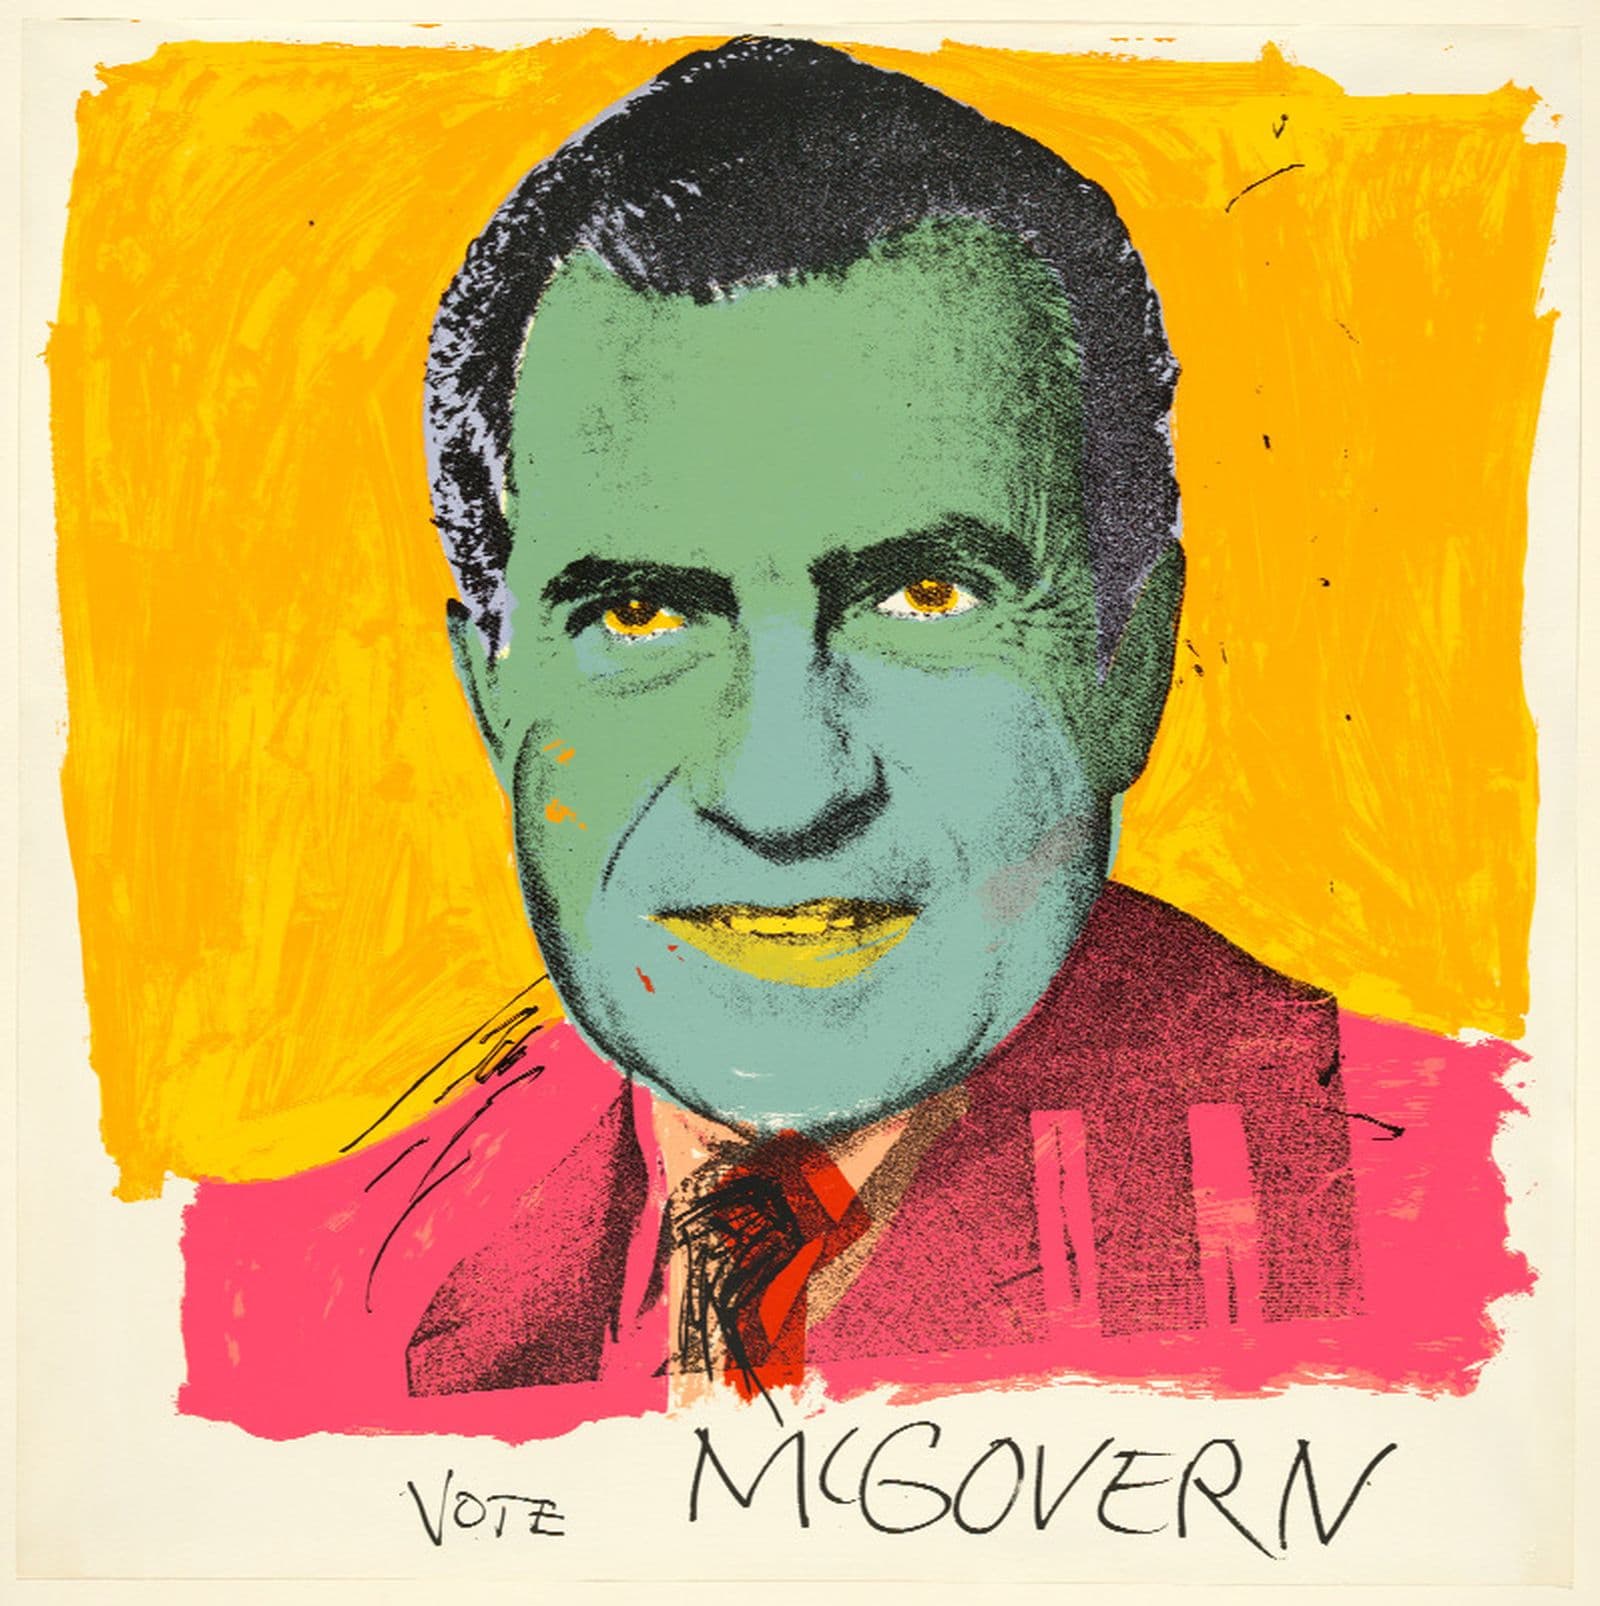 A print of Richard Nixon in blue, red, and yellow with the words "vote MCGOVERN" below